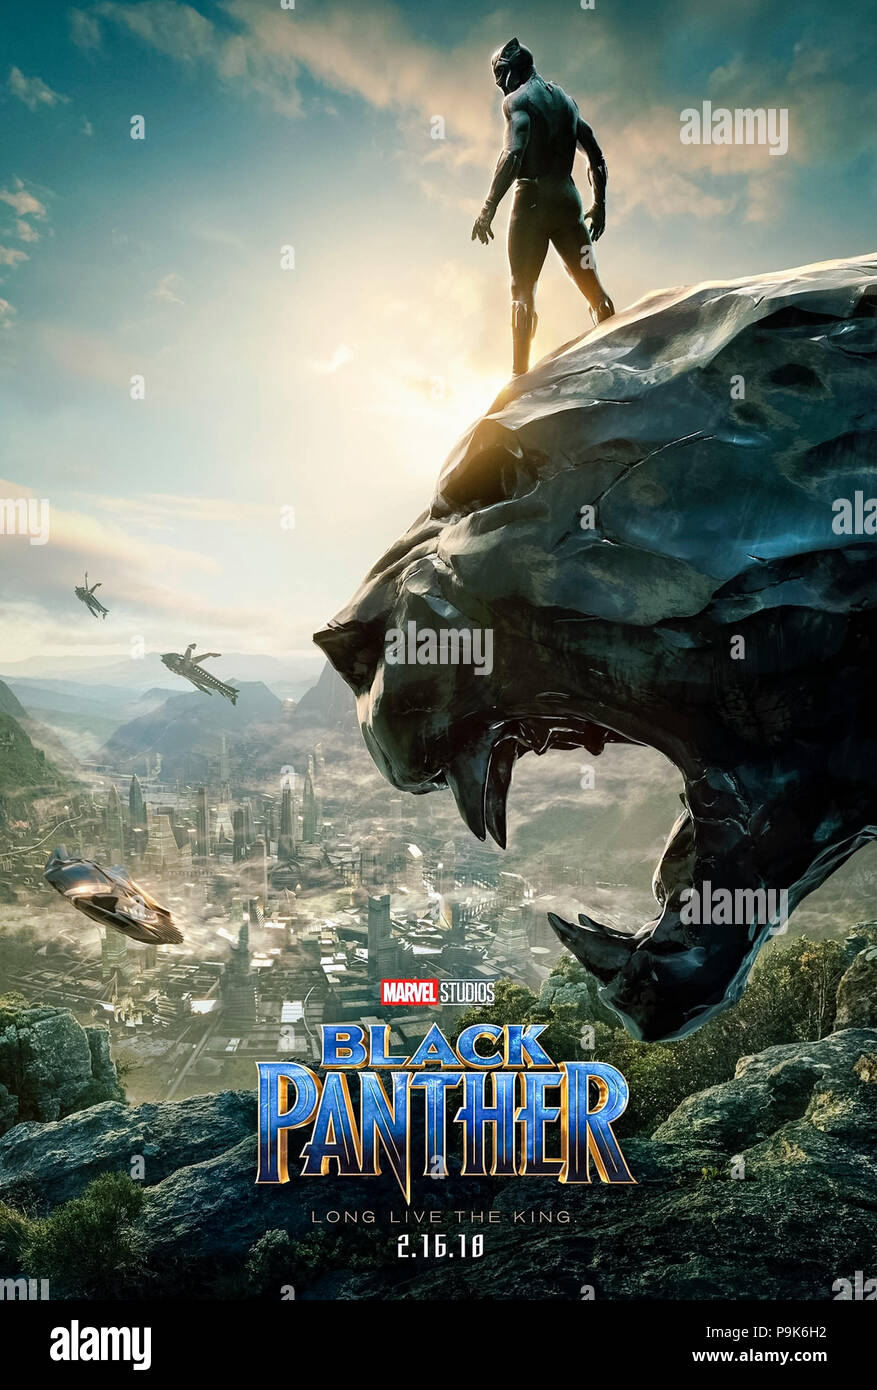 Black Panther (2018) directed by Ryan Coogler and starring Chadwick Boseman, Michael B. Jordan and Lupita Nyong'o. T'Challa uses the powers of vibranium to prevent them being misused; long live the King! Stock Photo